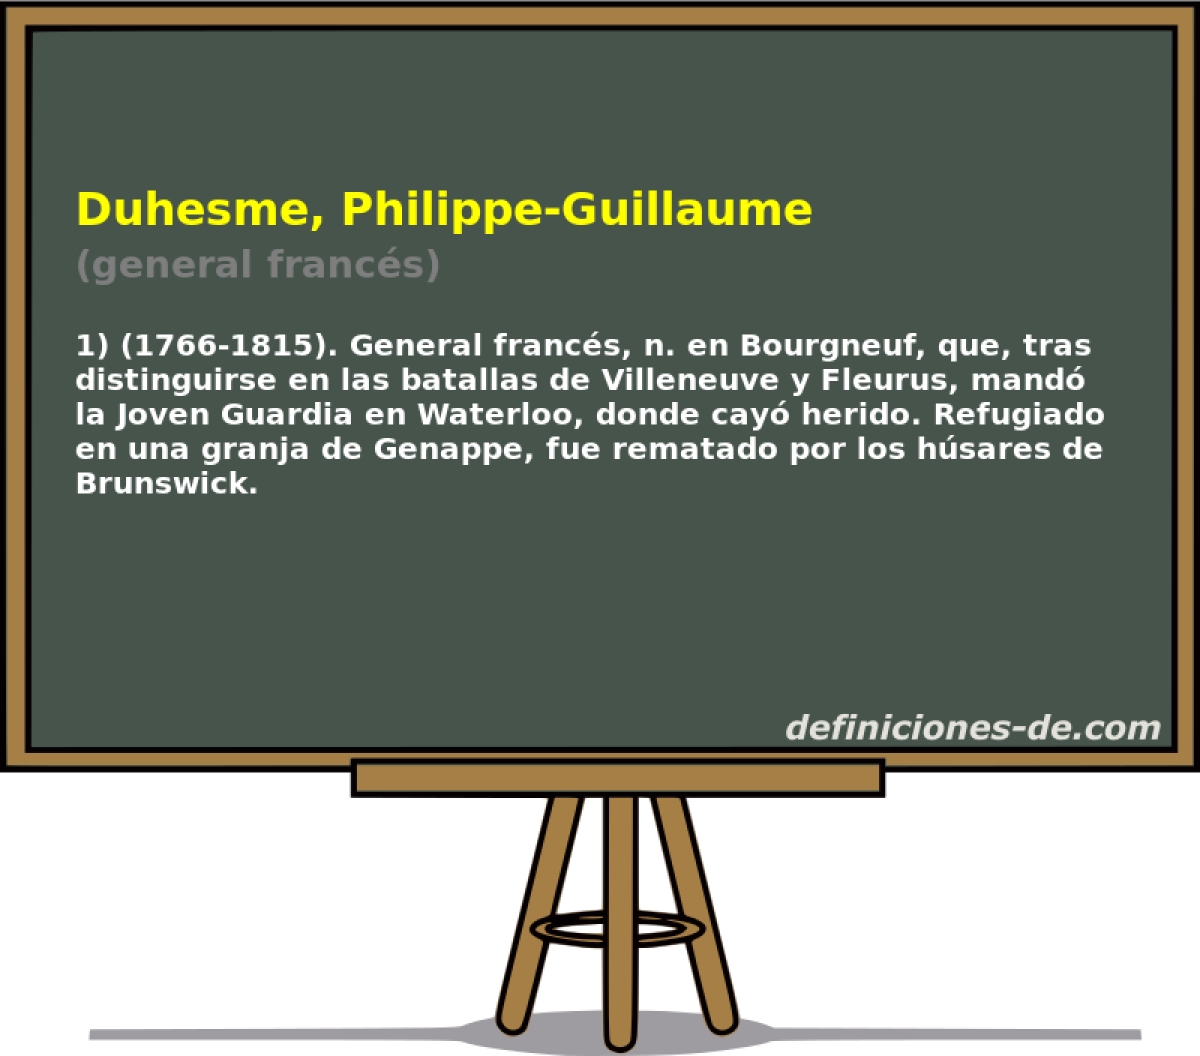 Duhesme, Philippe-Guillaume (general francs)